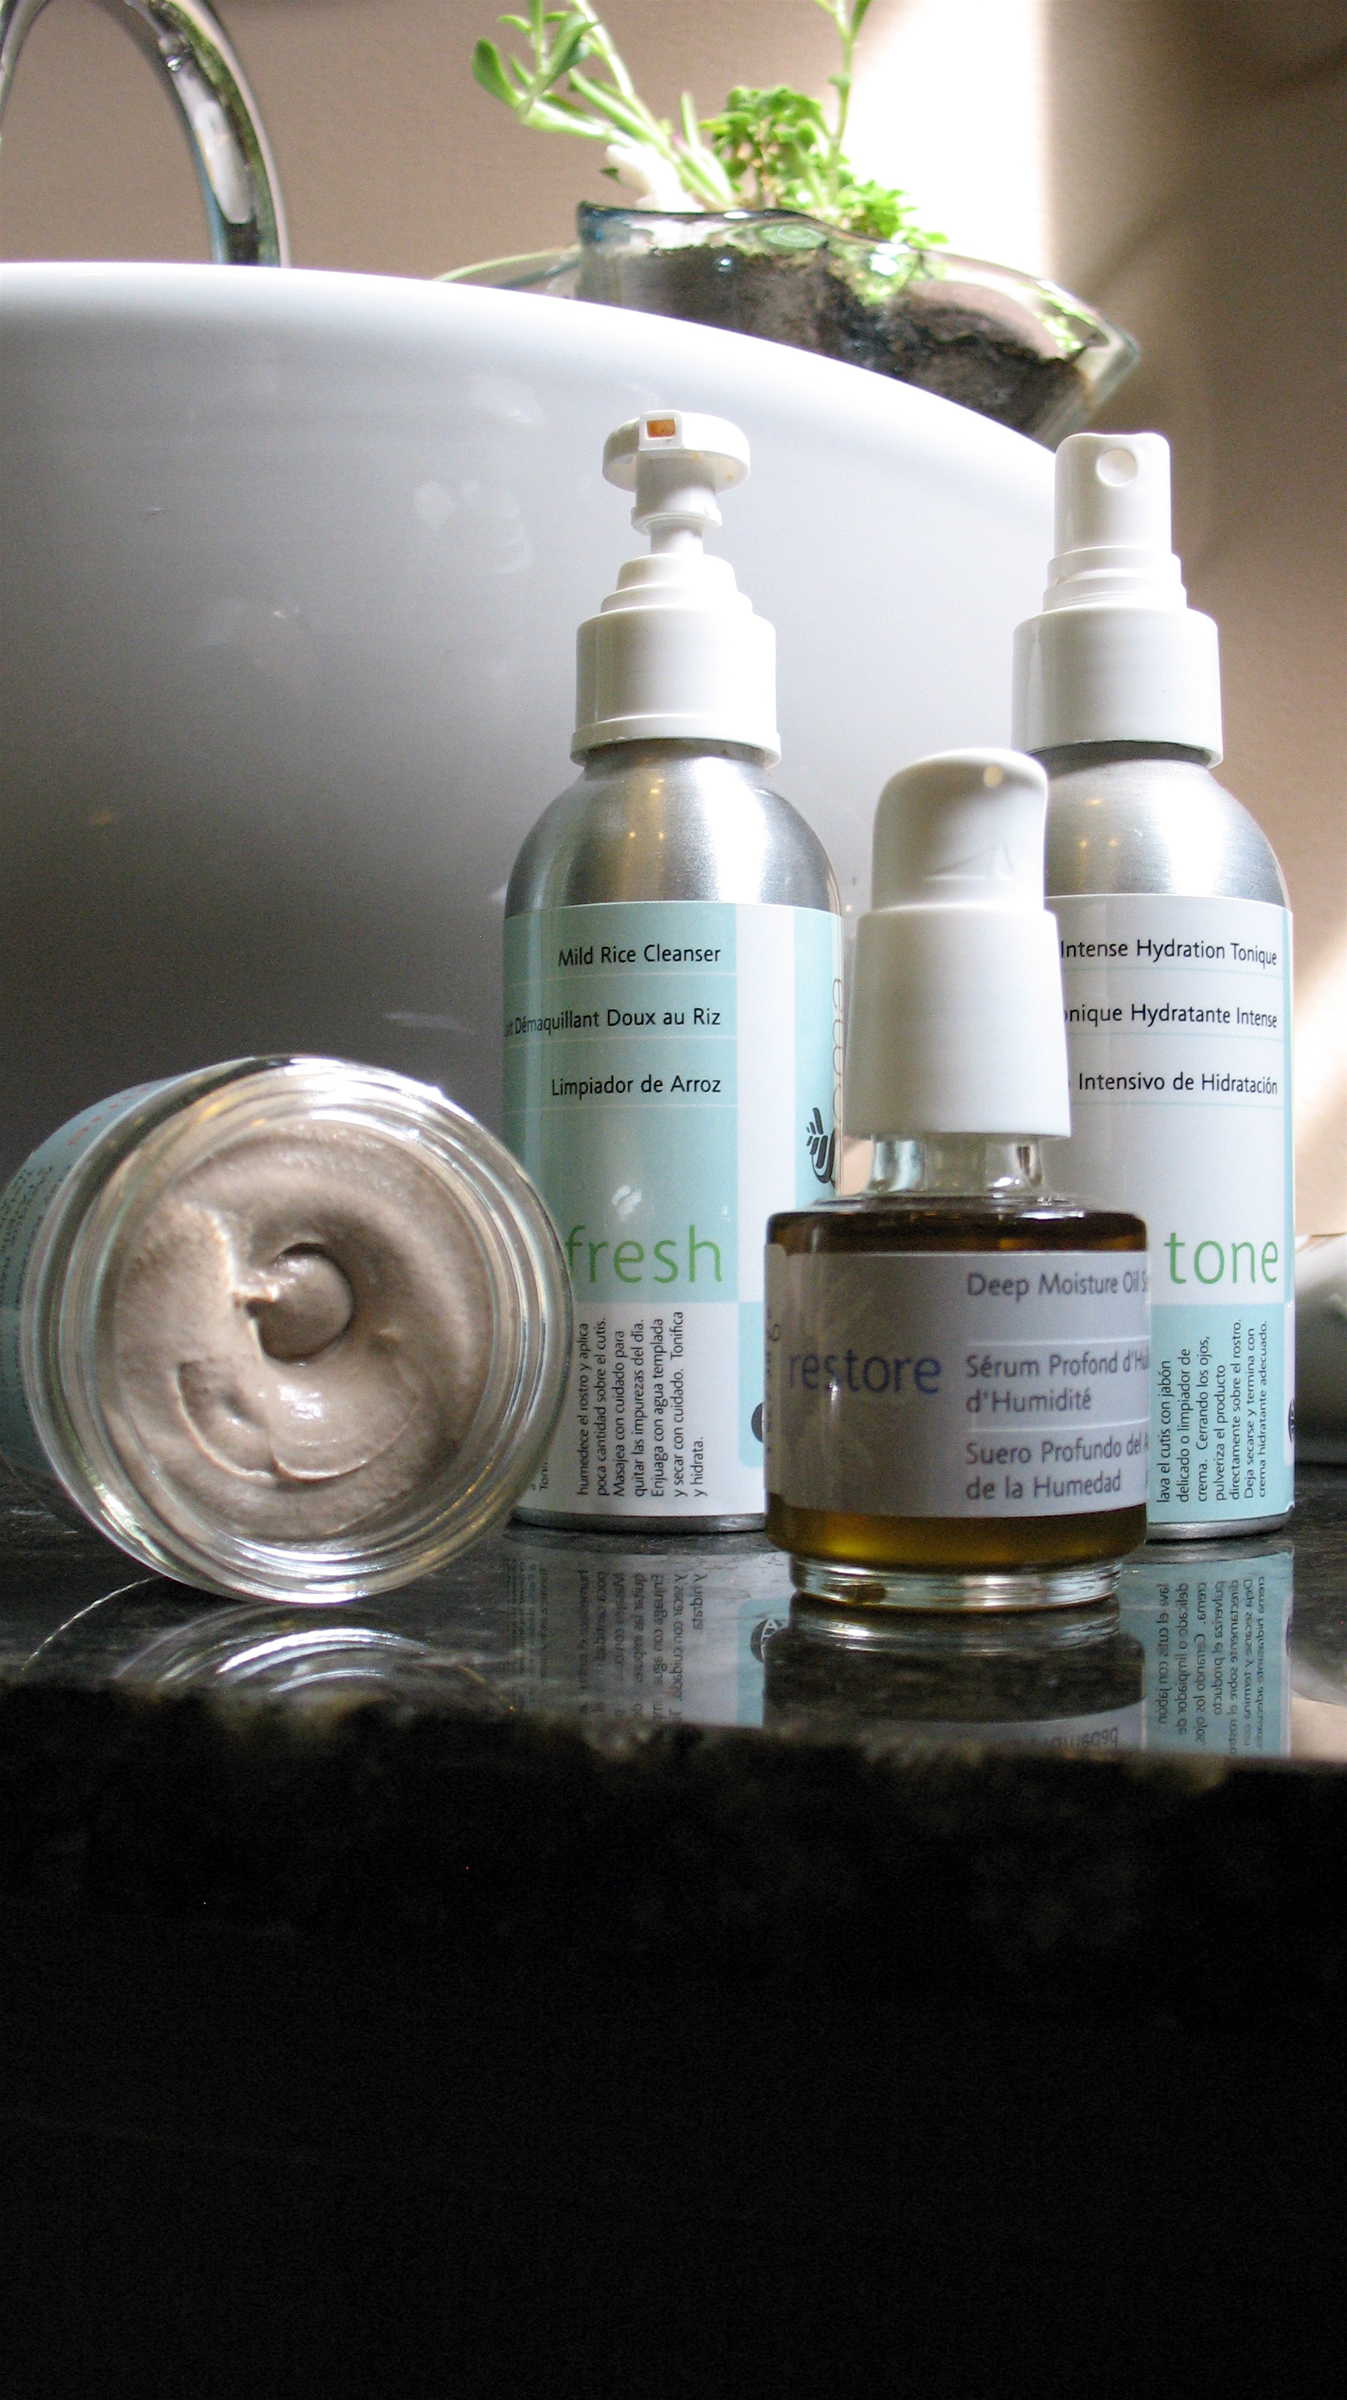 blissoma: new restore oil serum for healing age defiance $115 skincare set giveaway